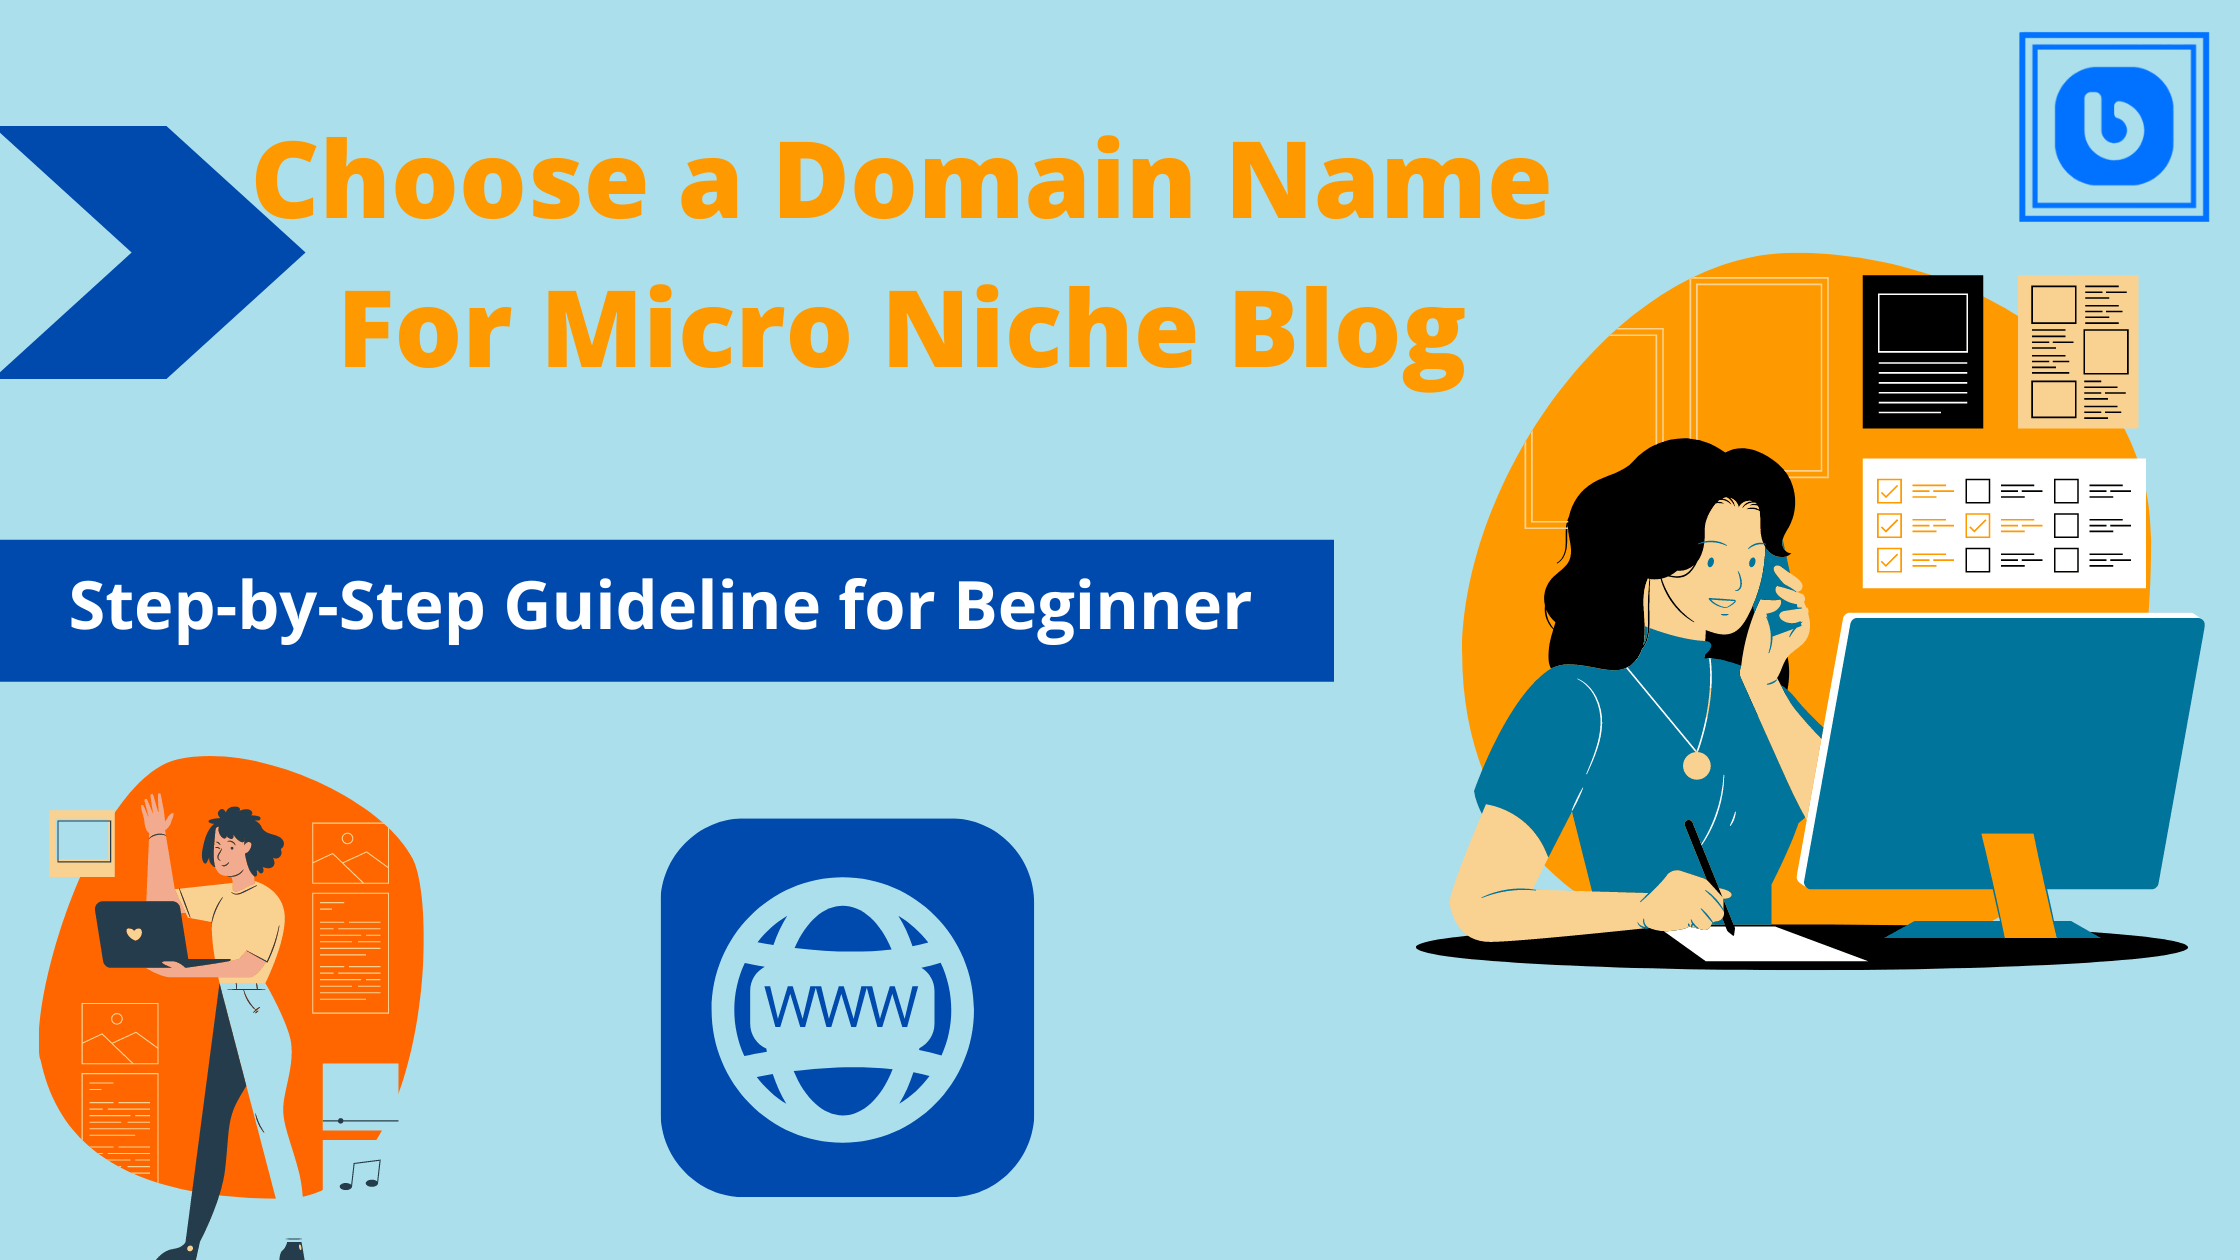 How to choose a domain name for a micro niche blog